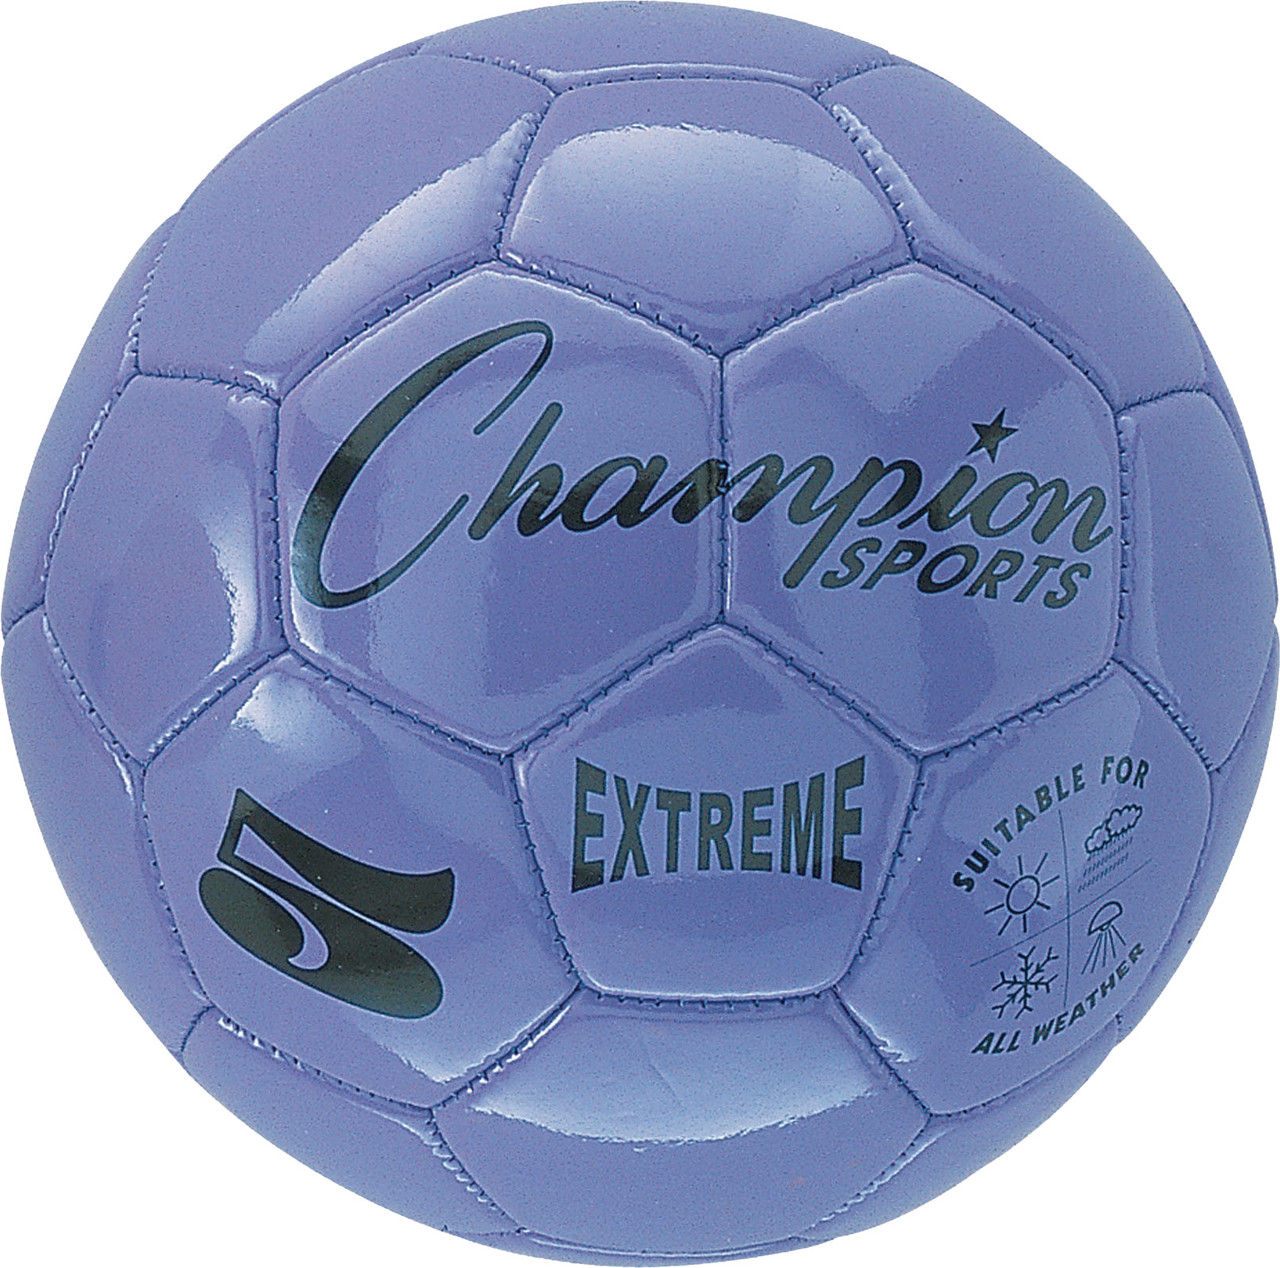 RED Size 4 Champion Sports Extreme Soft Touch Butyl Bladder Soccer Game Ball 